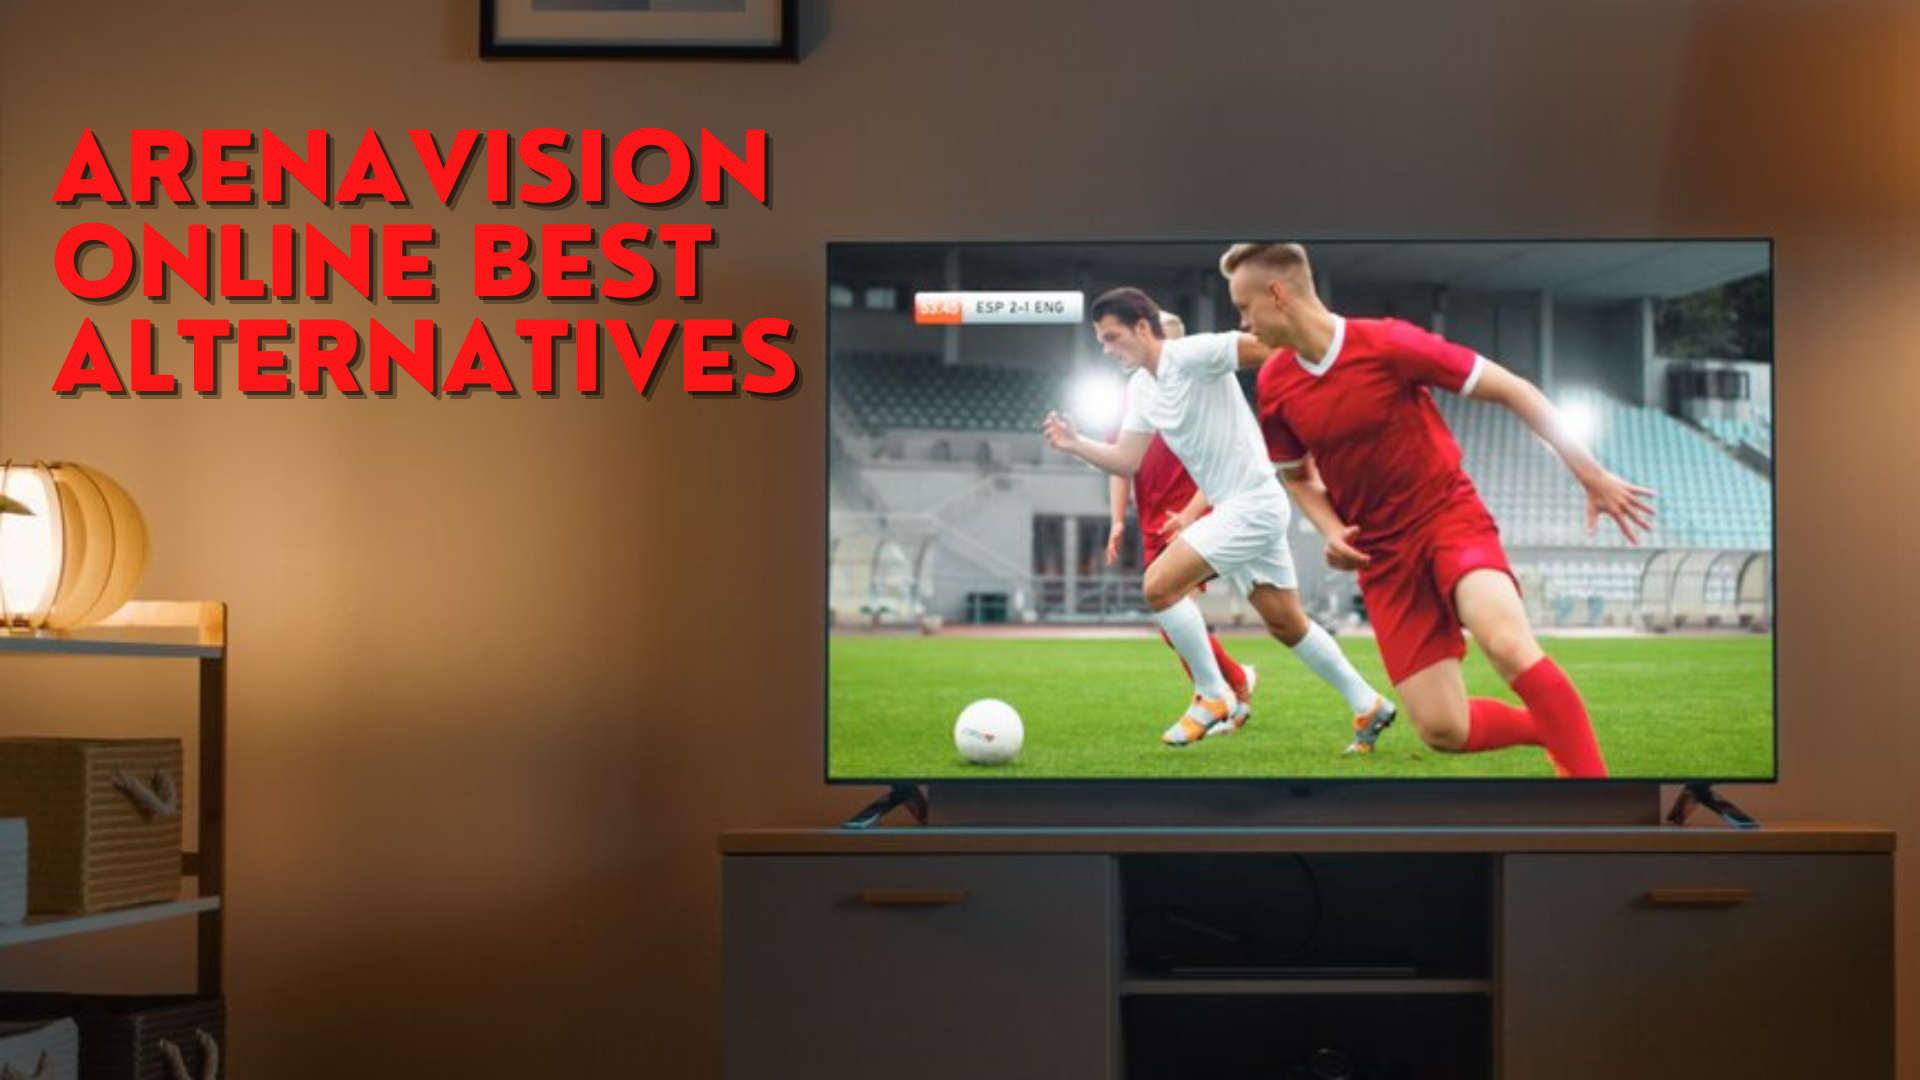 A big tv showing men playing sports placed on top of wooden cabinet 